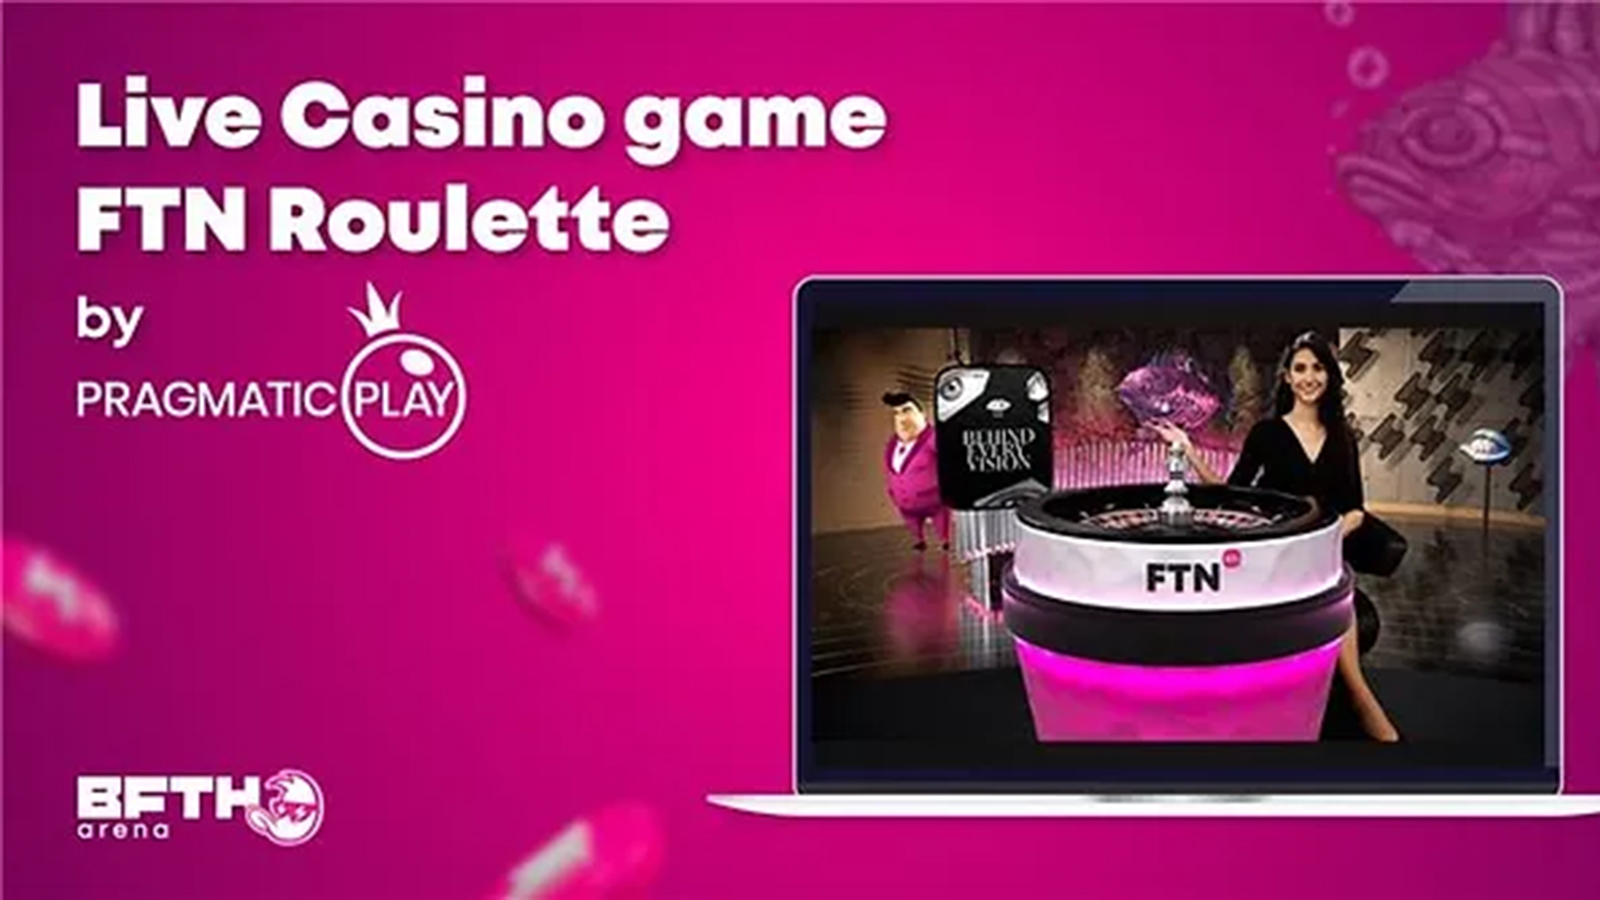 FTN Roulette - A Game of Innovation